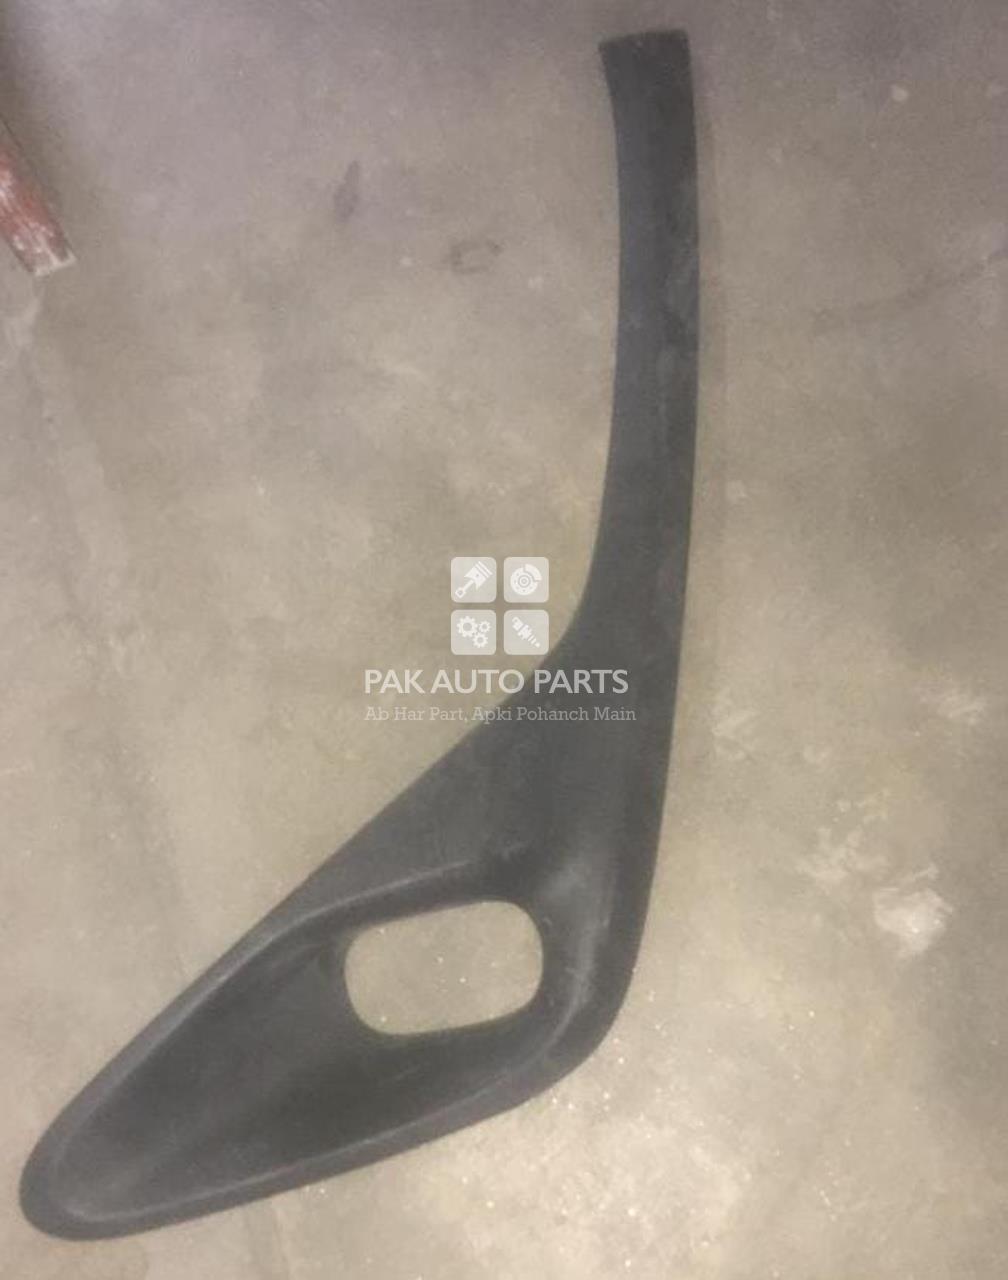 Picture of Toyota Sienta 2018 Front Bumper Fog Light Cover